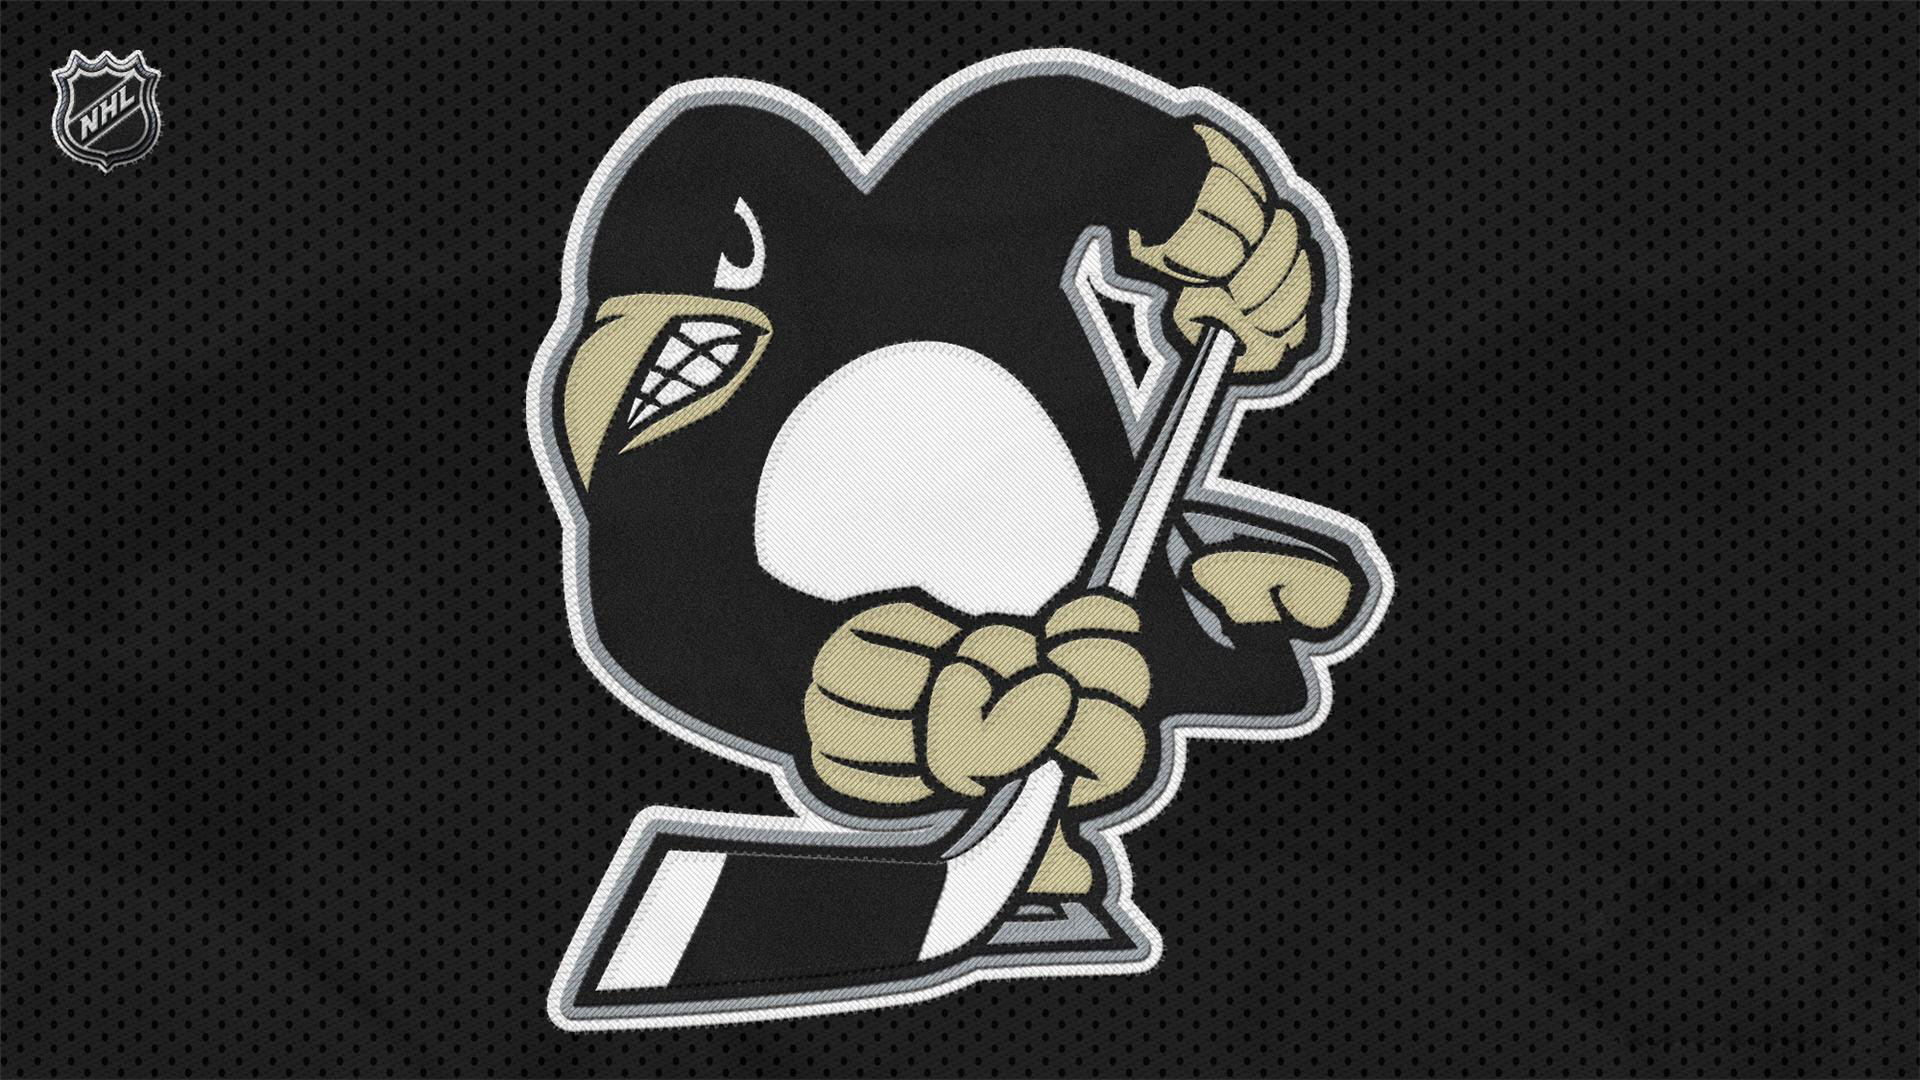 1920x1080 wallpaper.wiki-Pittsburgh-penguins-wallpapers-pittsburgh-penguins -background-